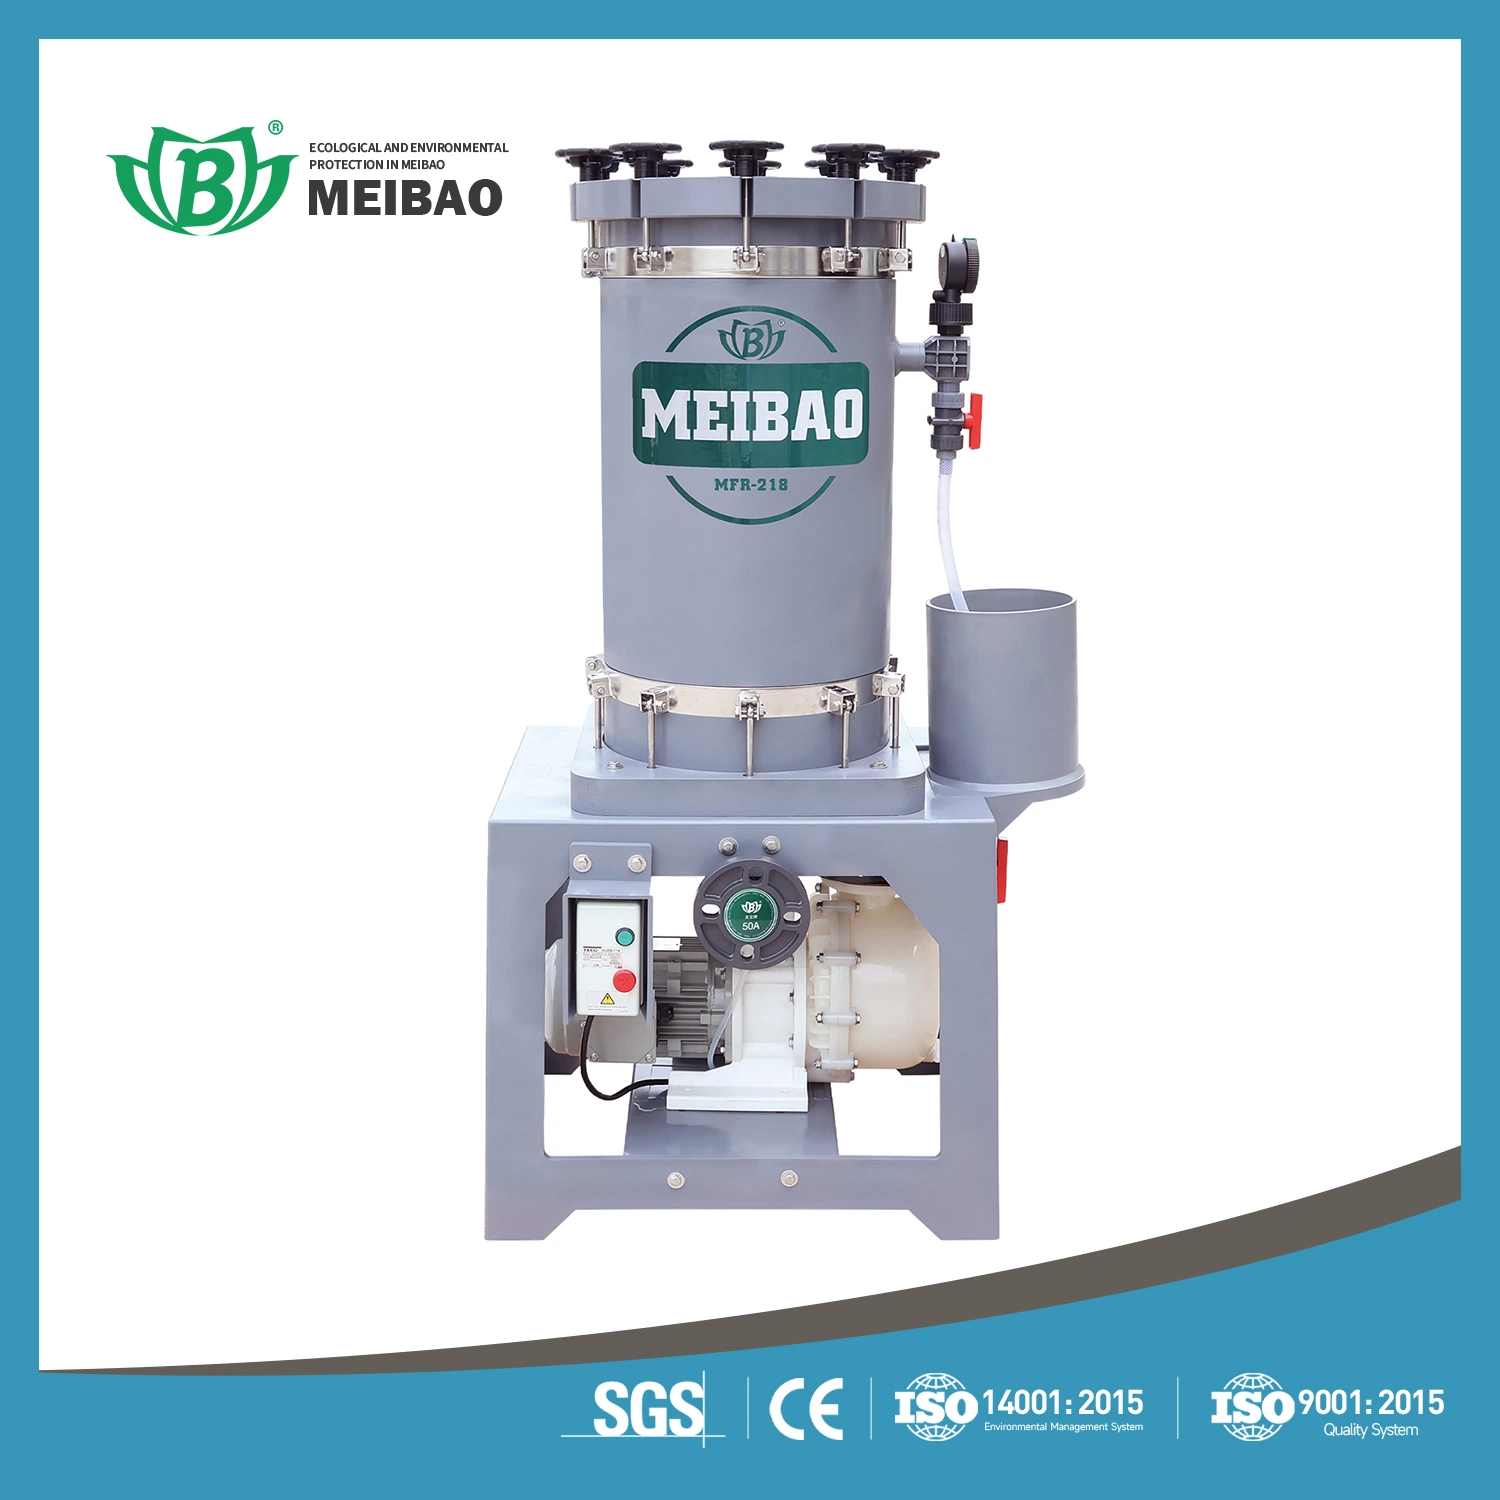 Acid and Alkali Resistant Chemical Filtration Machine for Electroplating and Etching